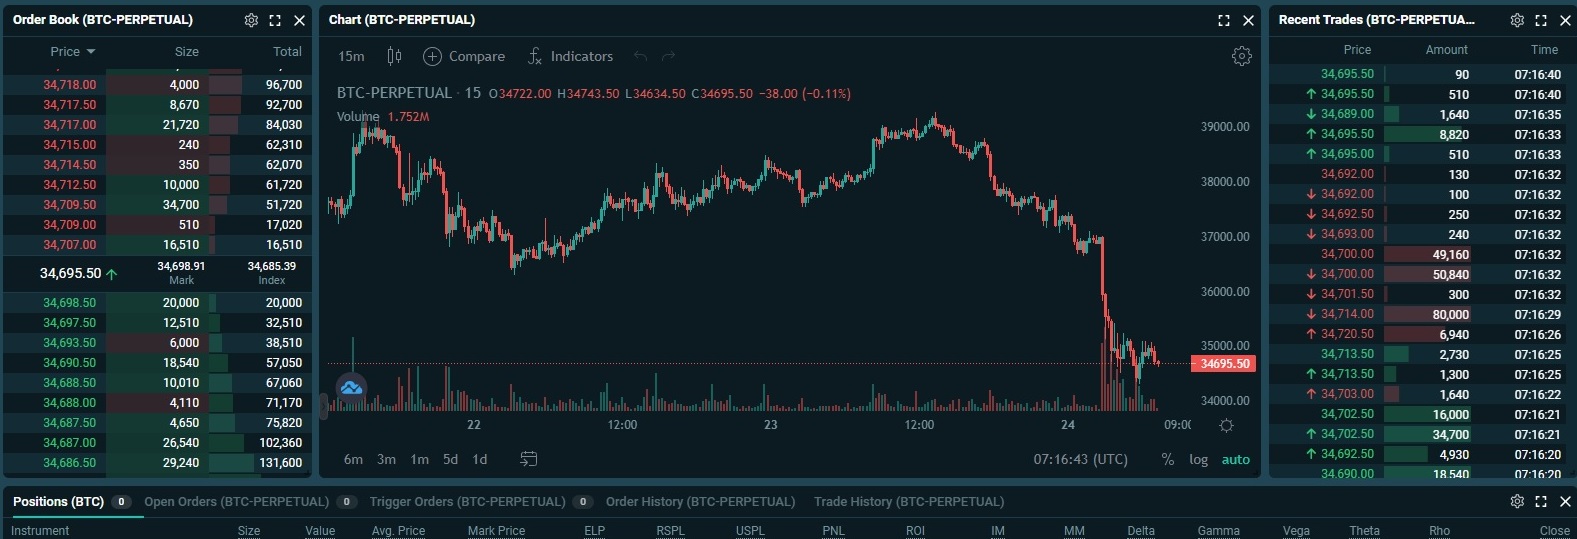 Charts, order book and recent trades on Deribit